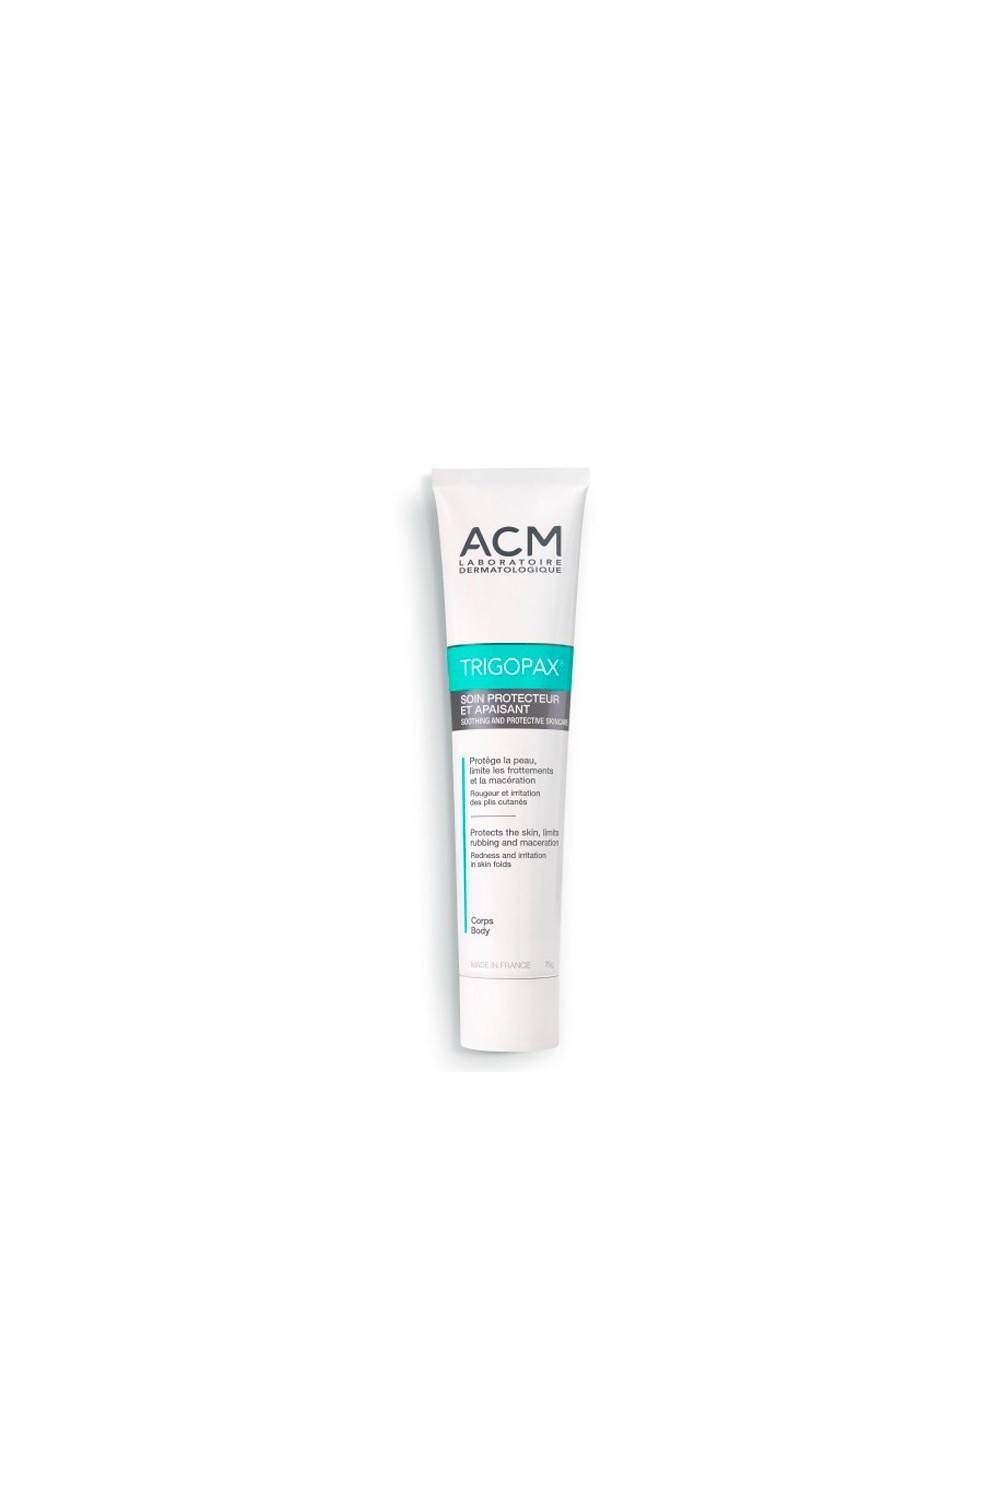 ACM Trigopax Protective and Soothing Cream 30ml